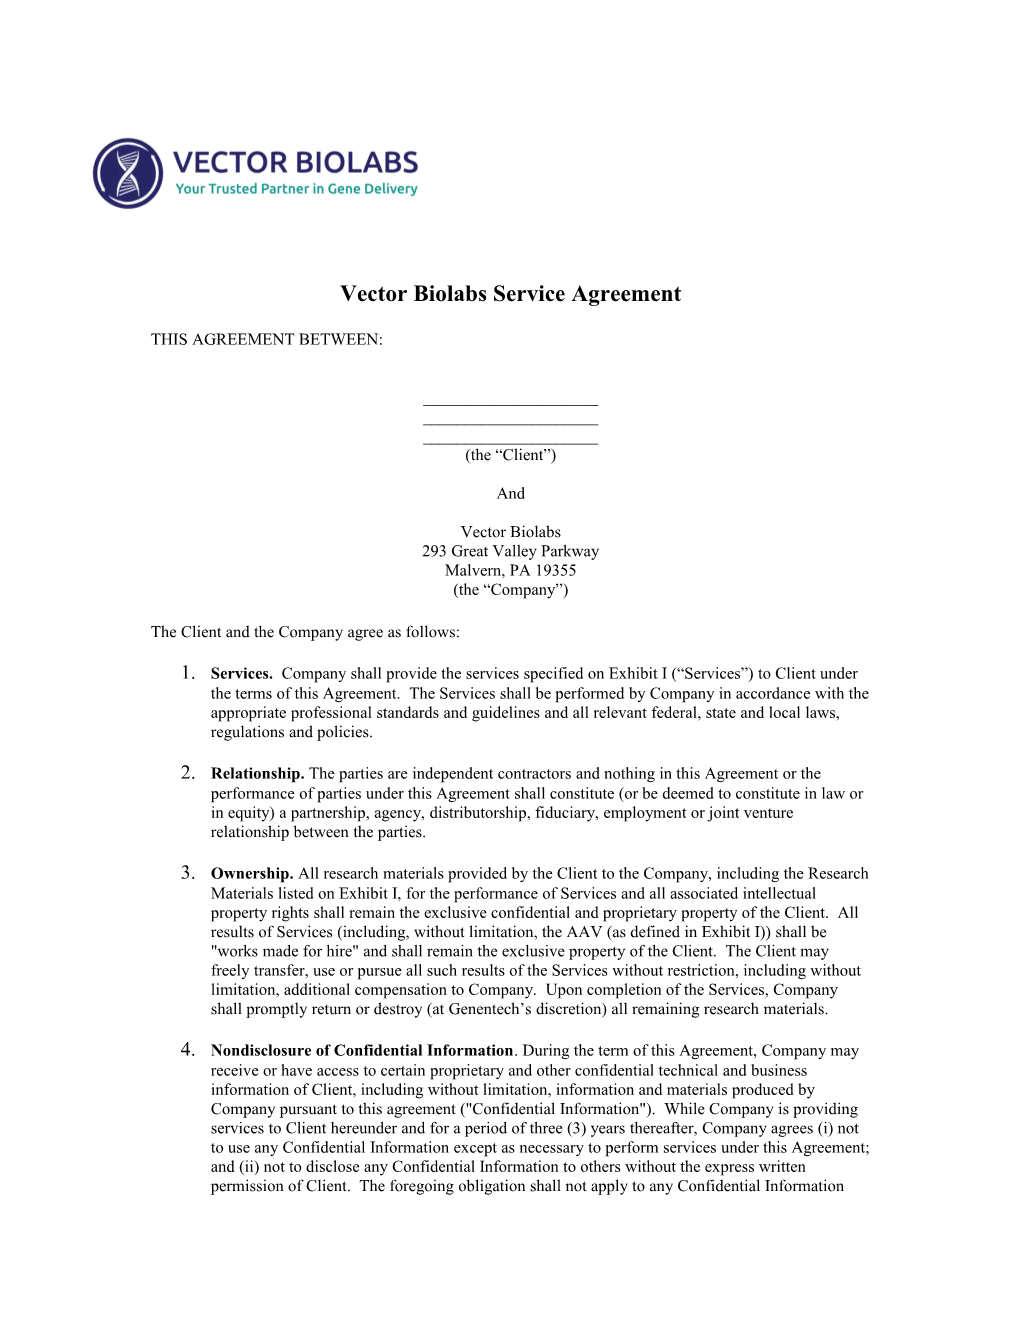 Vector Biolabs Service Agreement